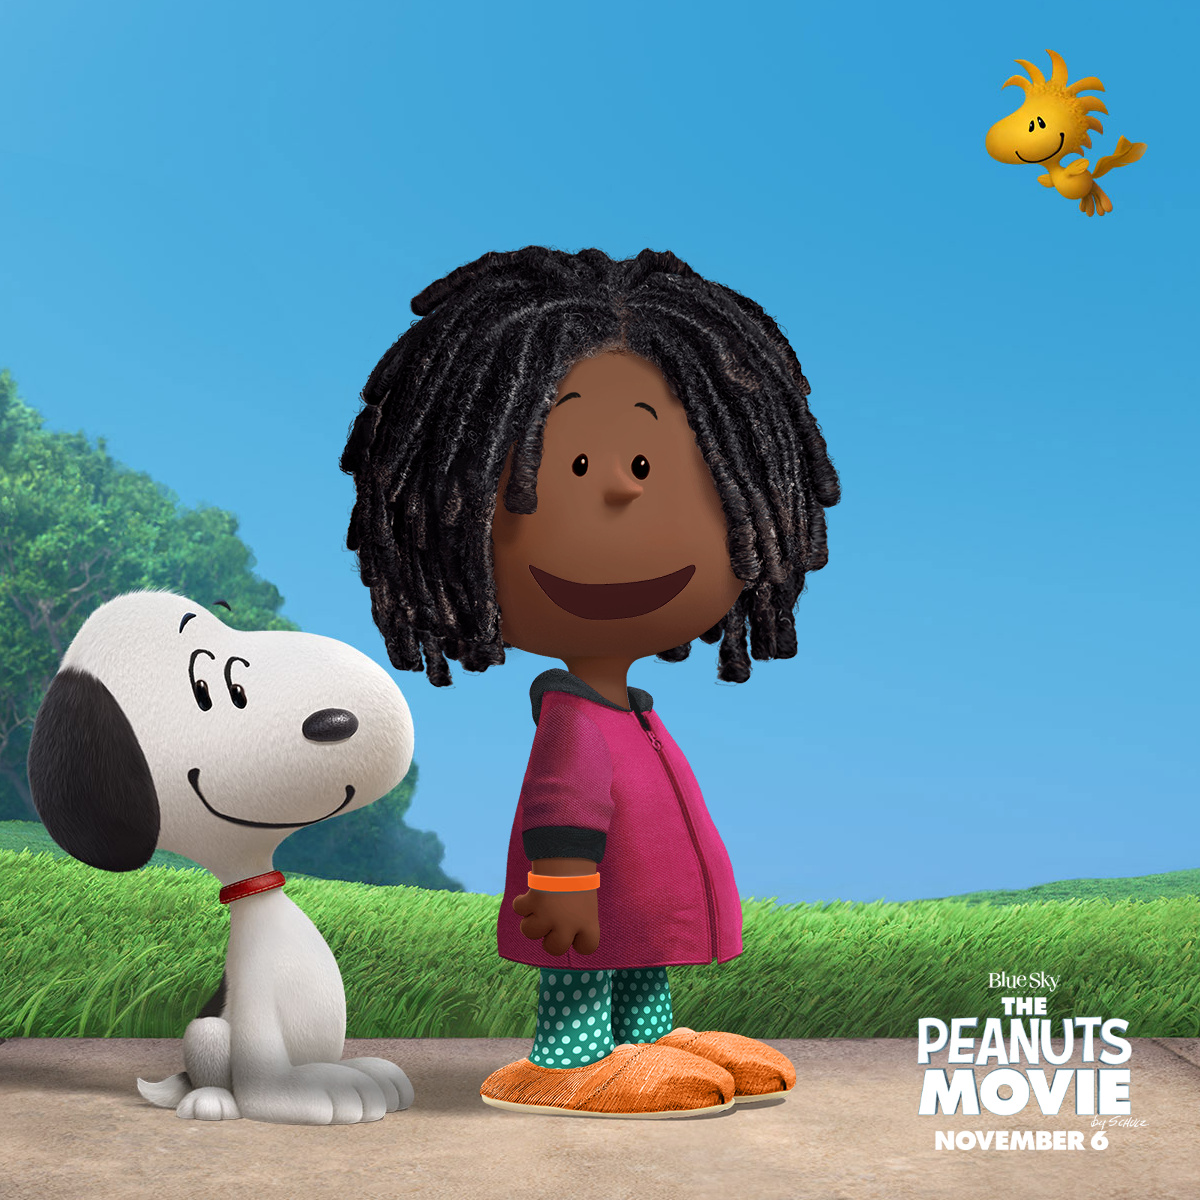 The “PeanutizeMe” Game Works for Families with Different Colors